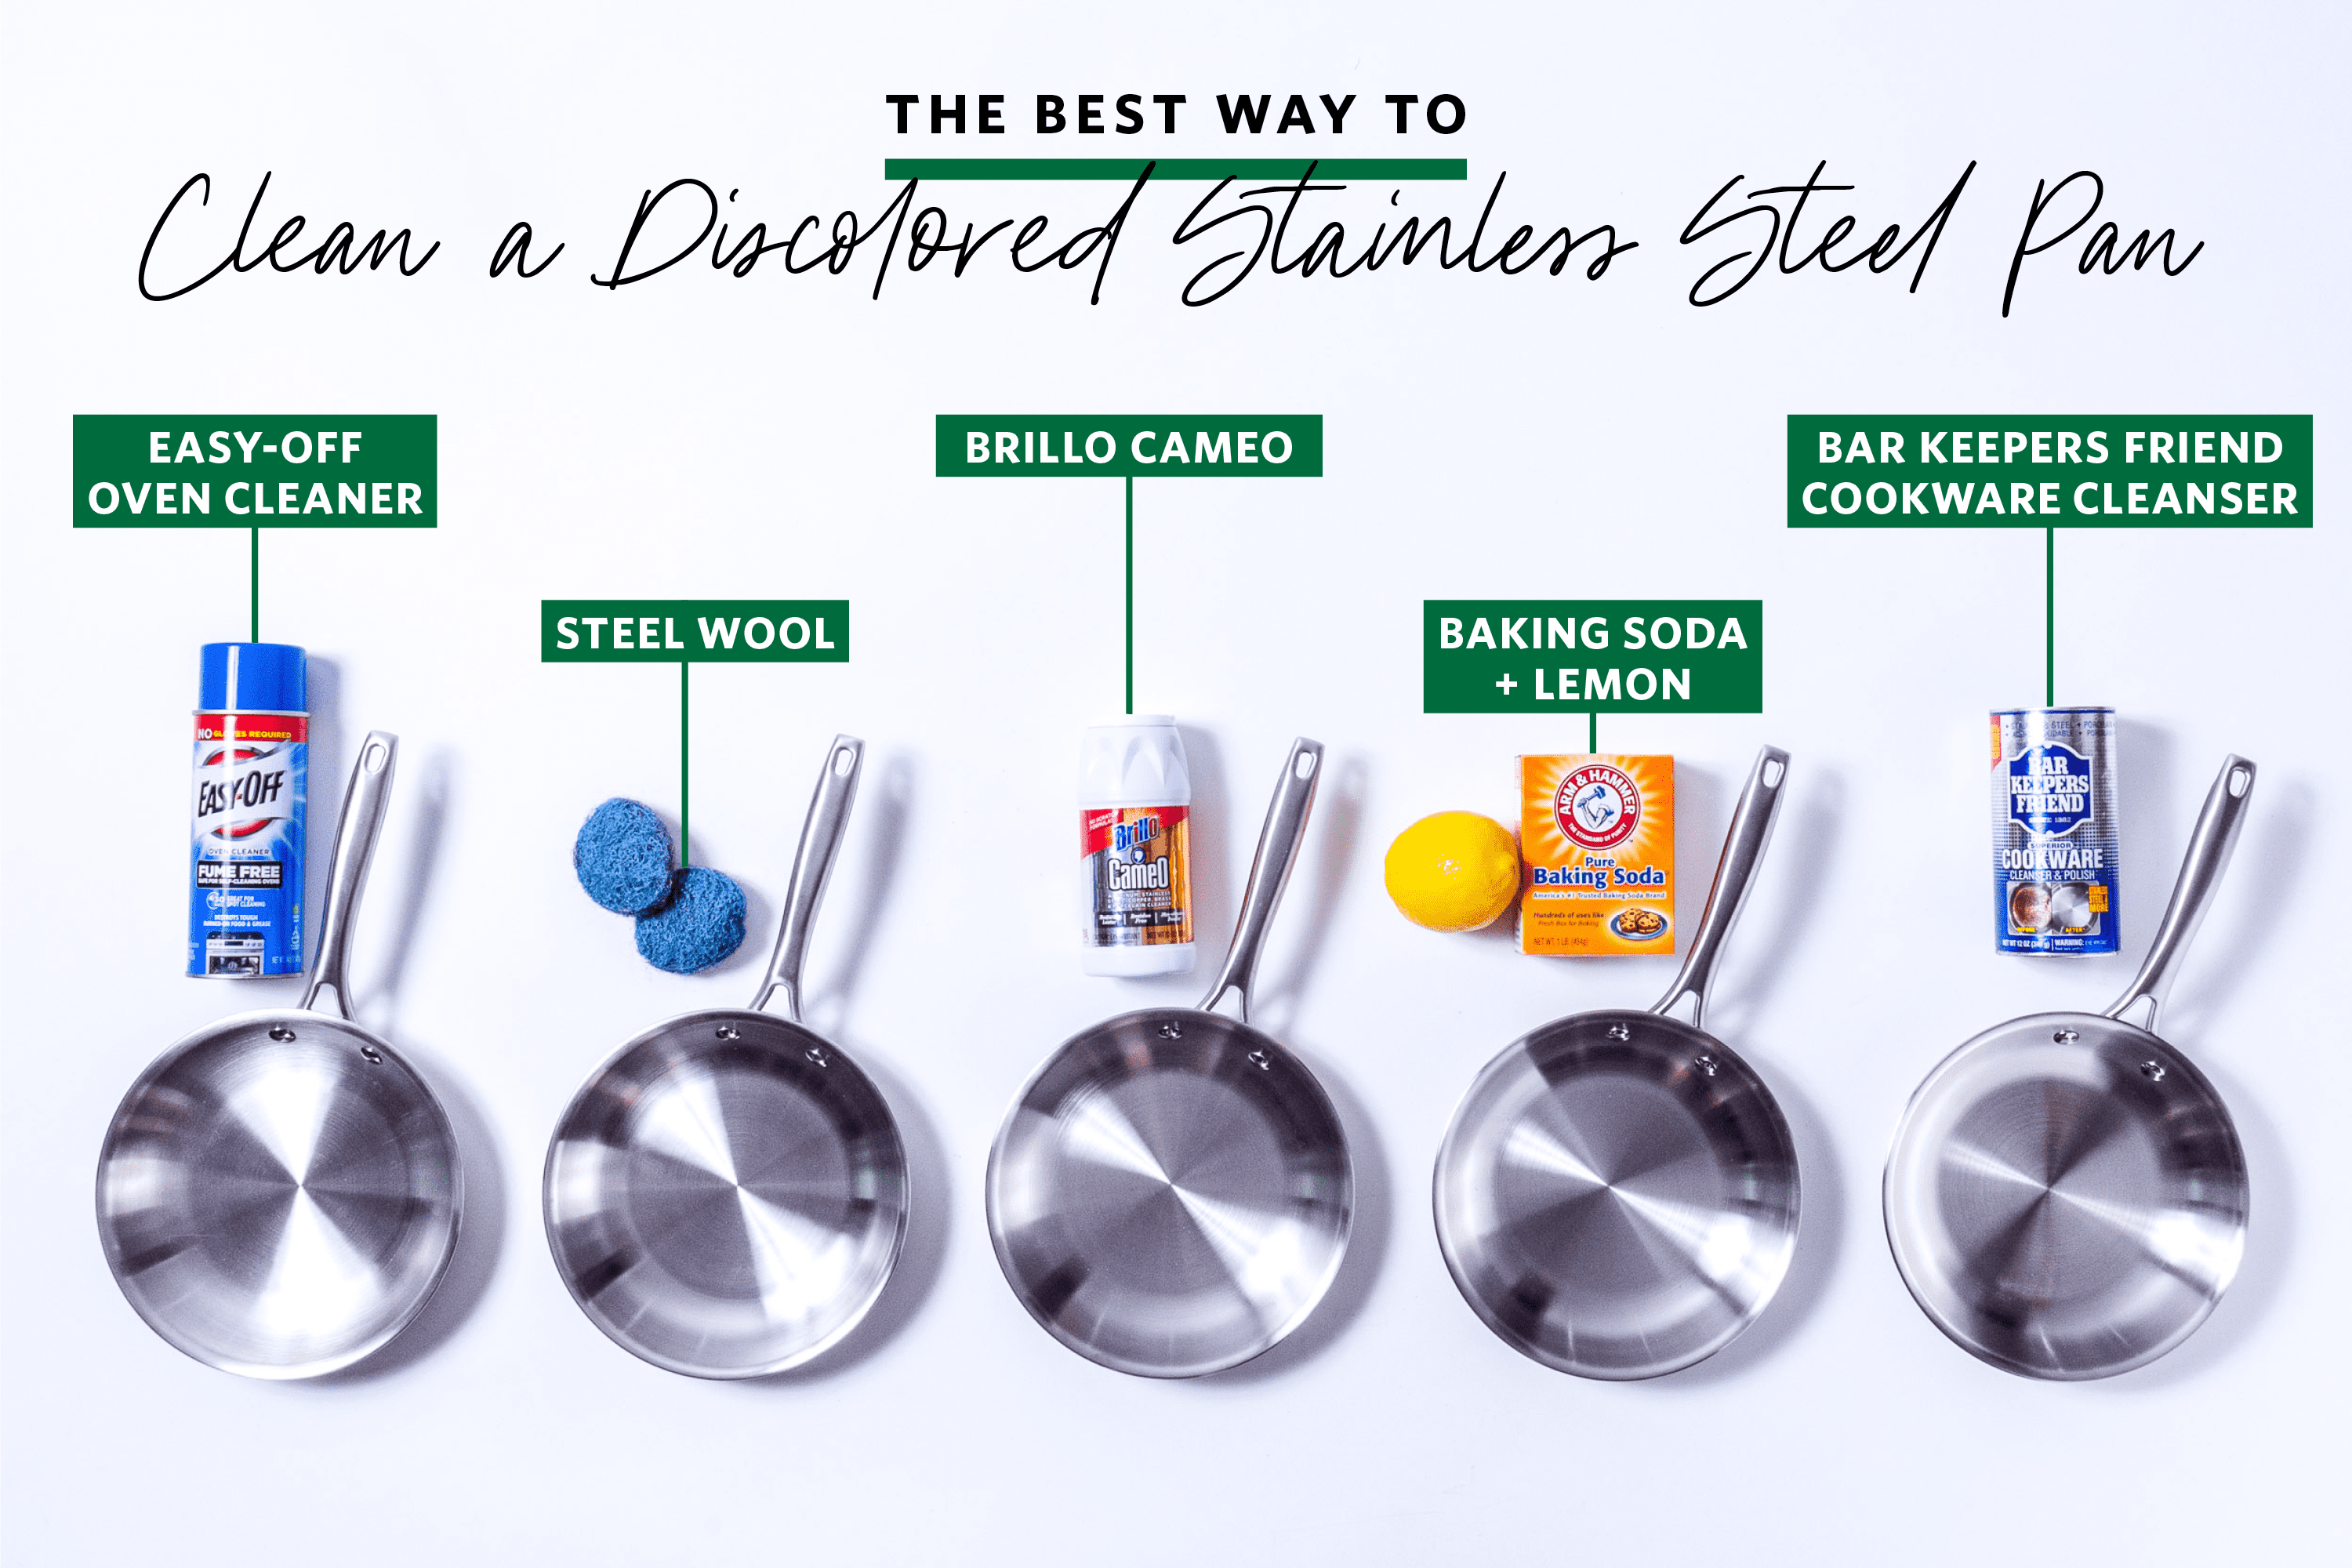 We Tried 5 Methods for Cleaning Discolored Stainless Steel Pans